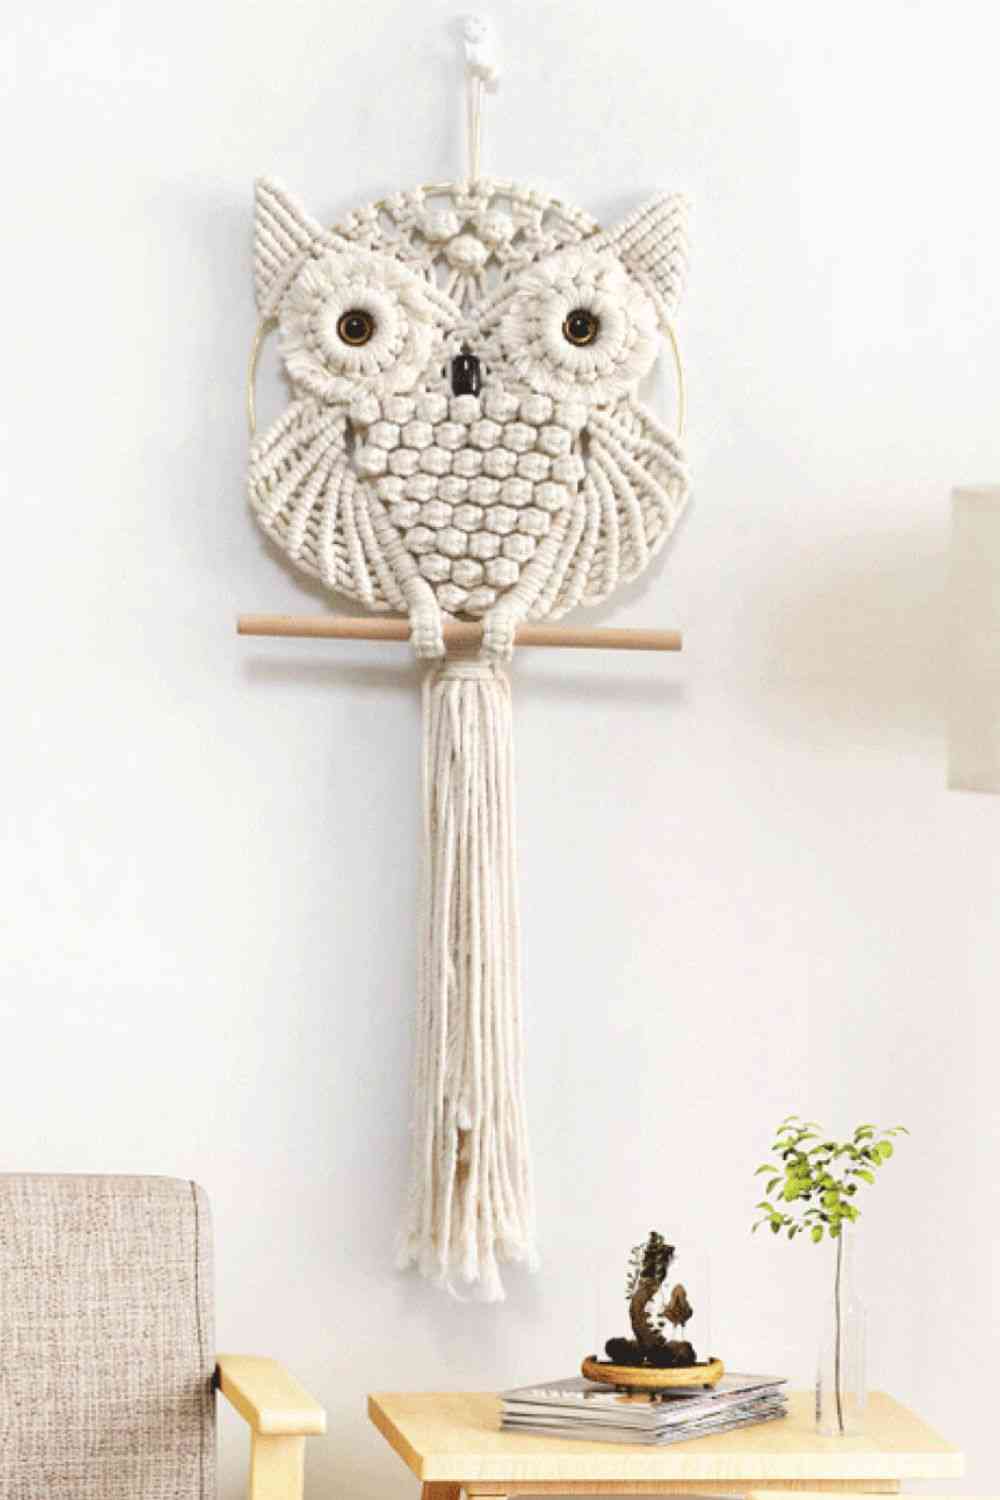 Hand-Woven Owl Macrame Wall Hanging Decoration